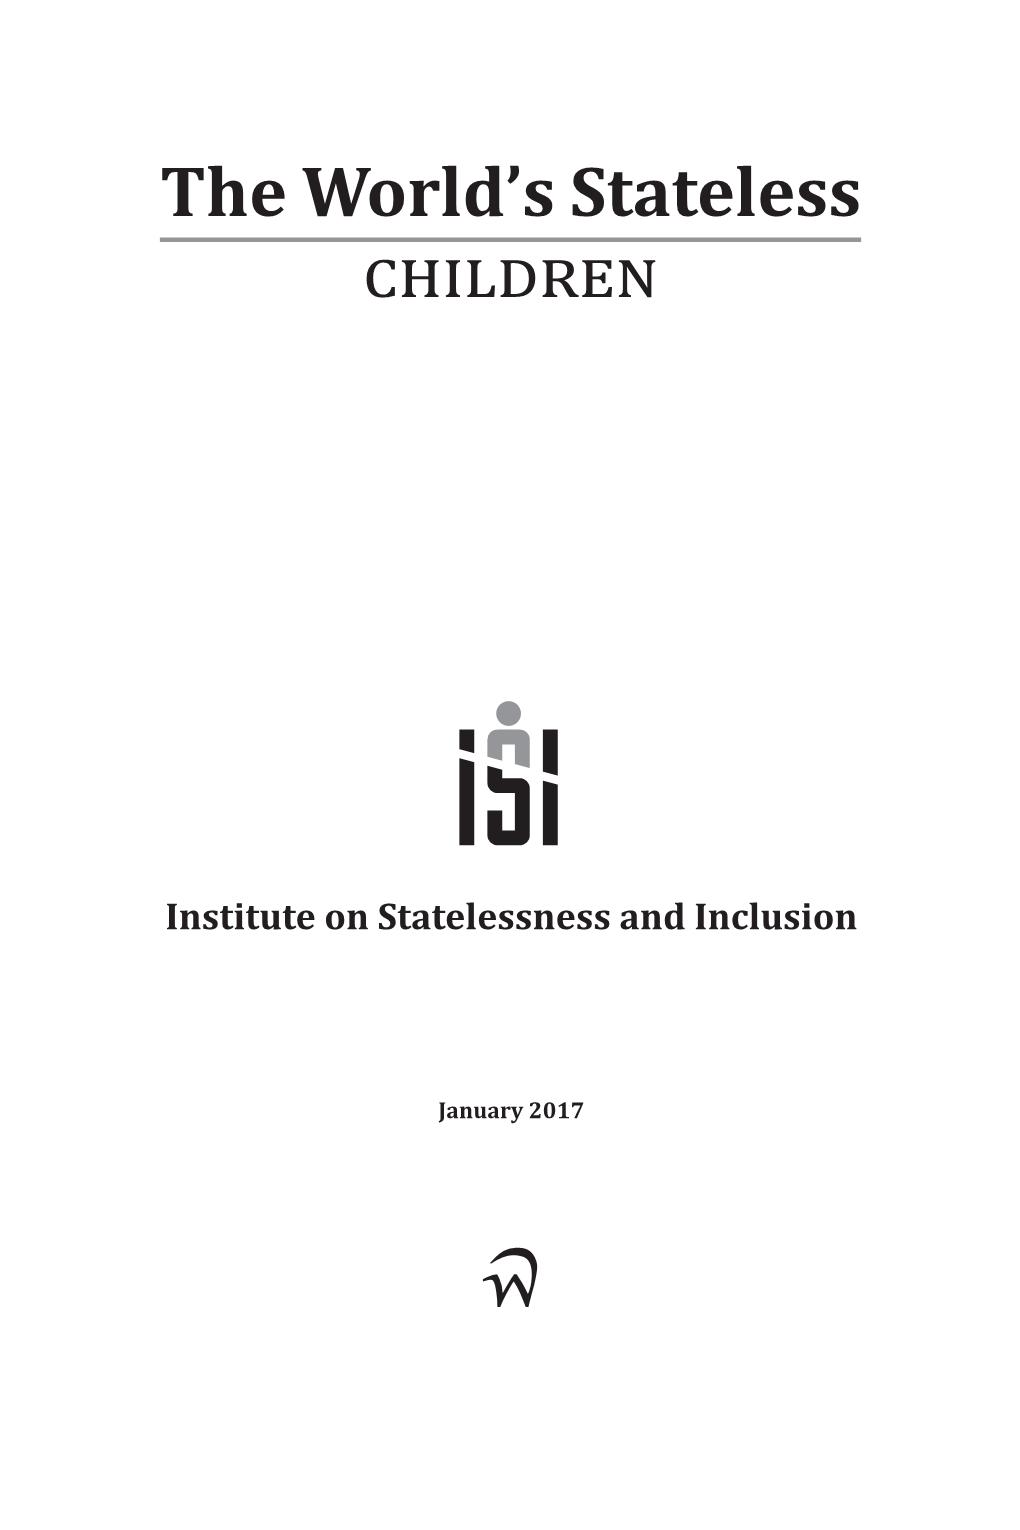 Institute on Stateless and Inclusion